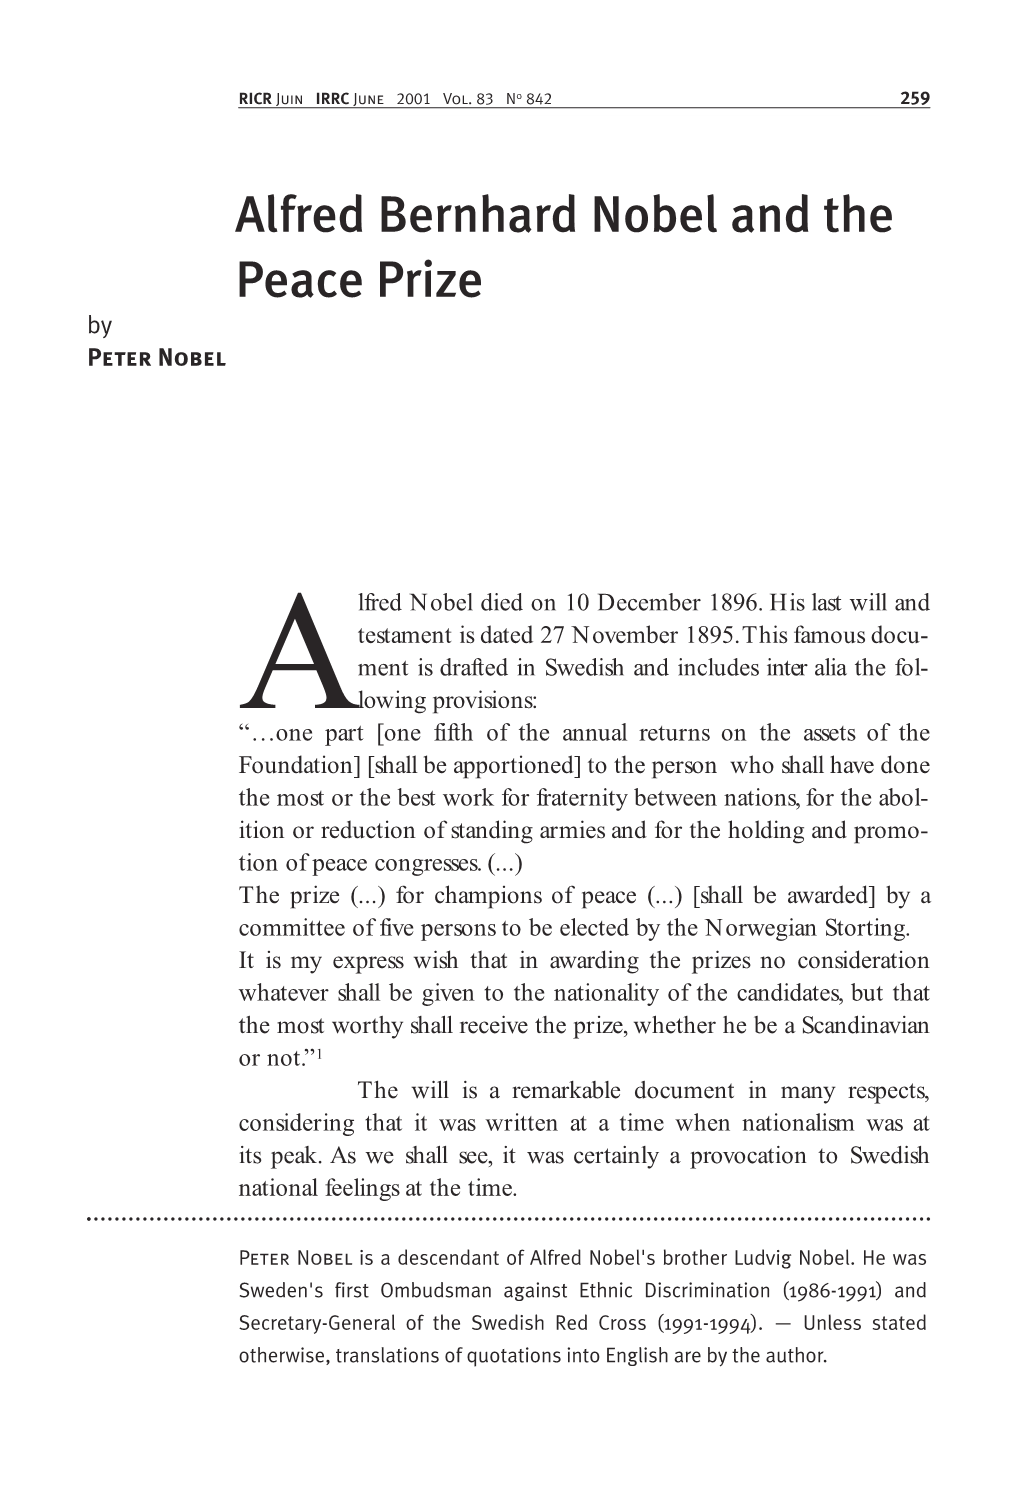 Alfred Bernhard Nobel and the Peace Prize by Peter Nobel